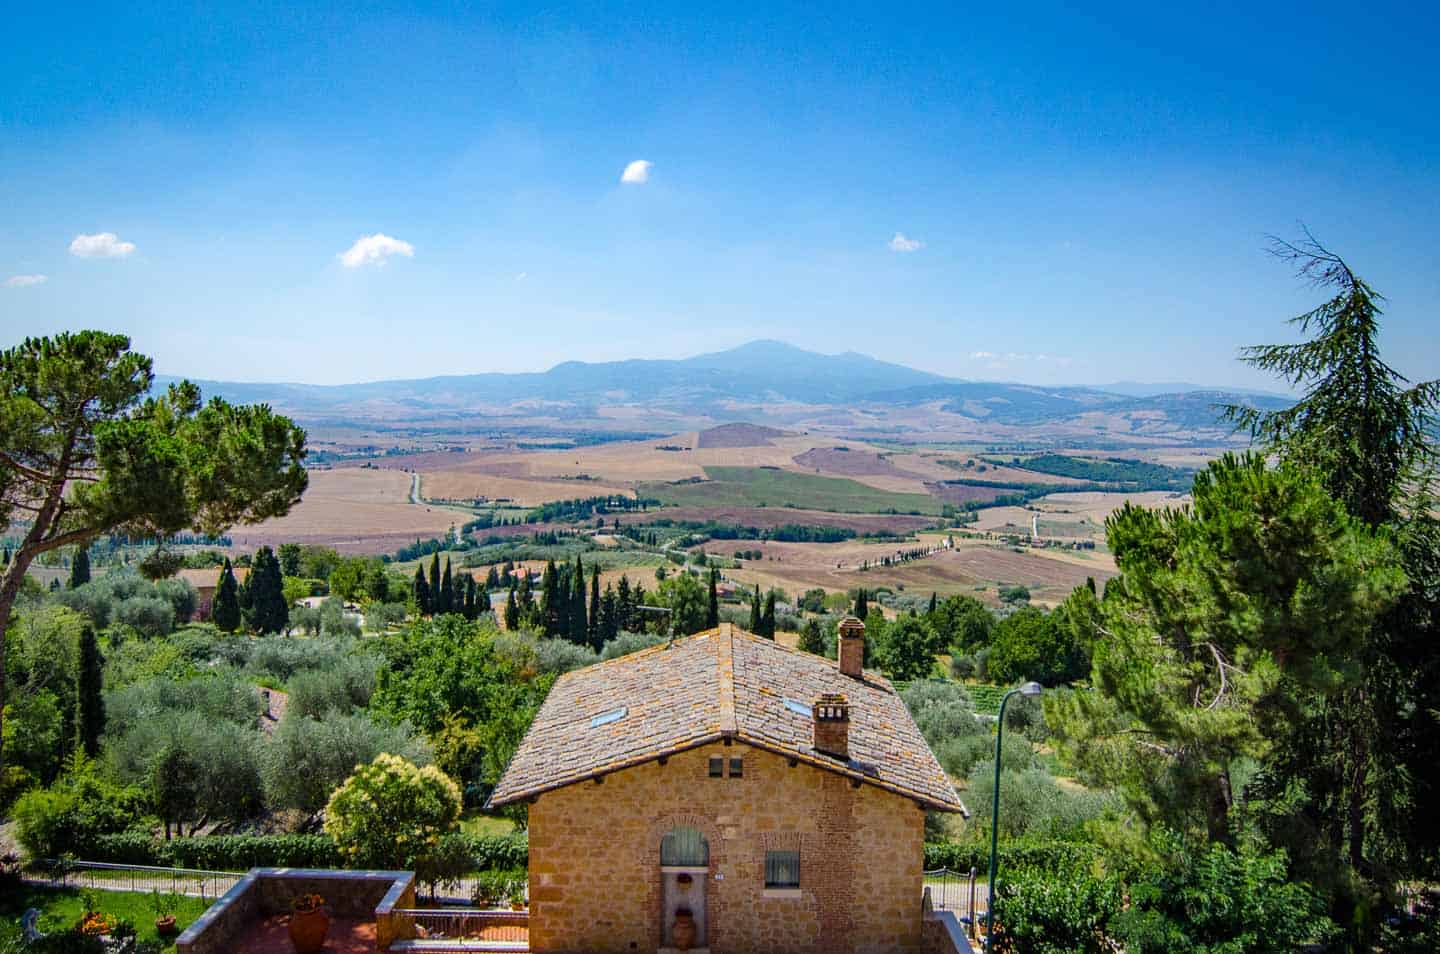 Things to do in Pienza Italy-House on the hill - Tuscan Villa | Getting ...